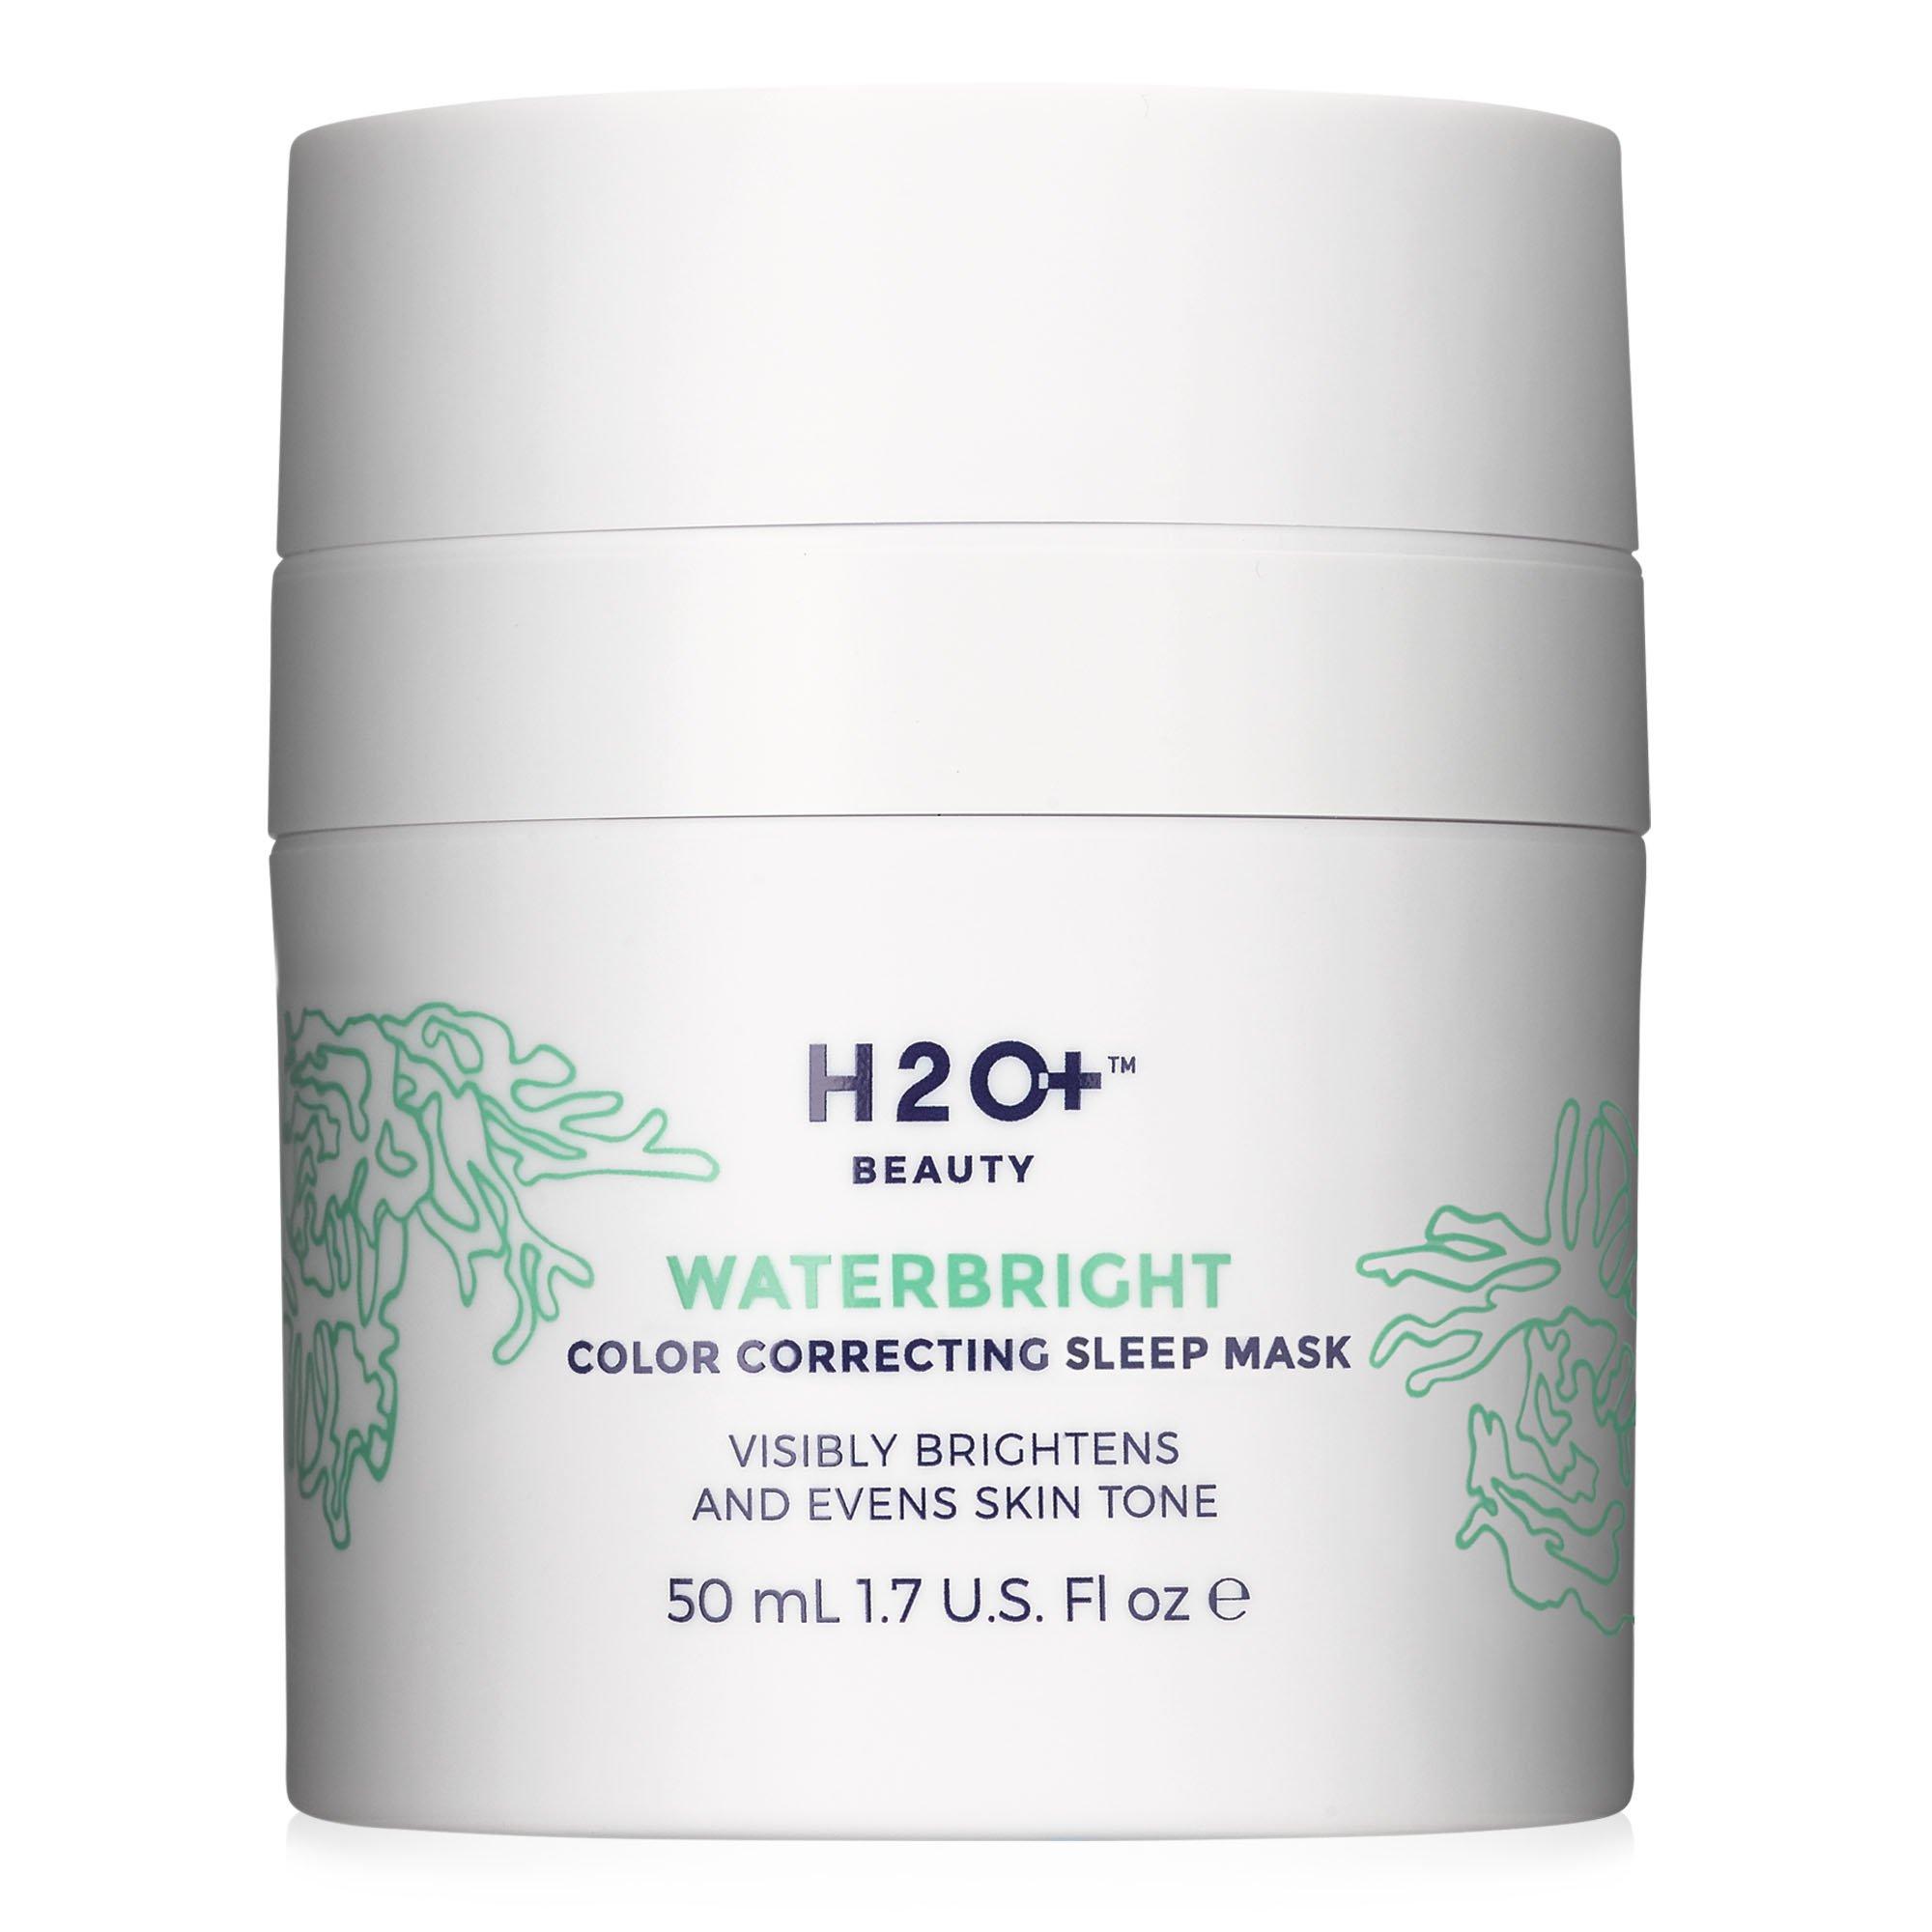 Waterbright Overnight Color Correcting Mask